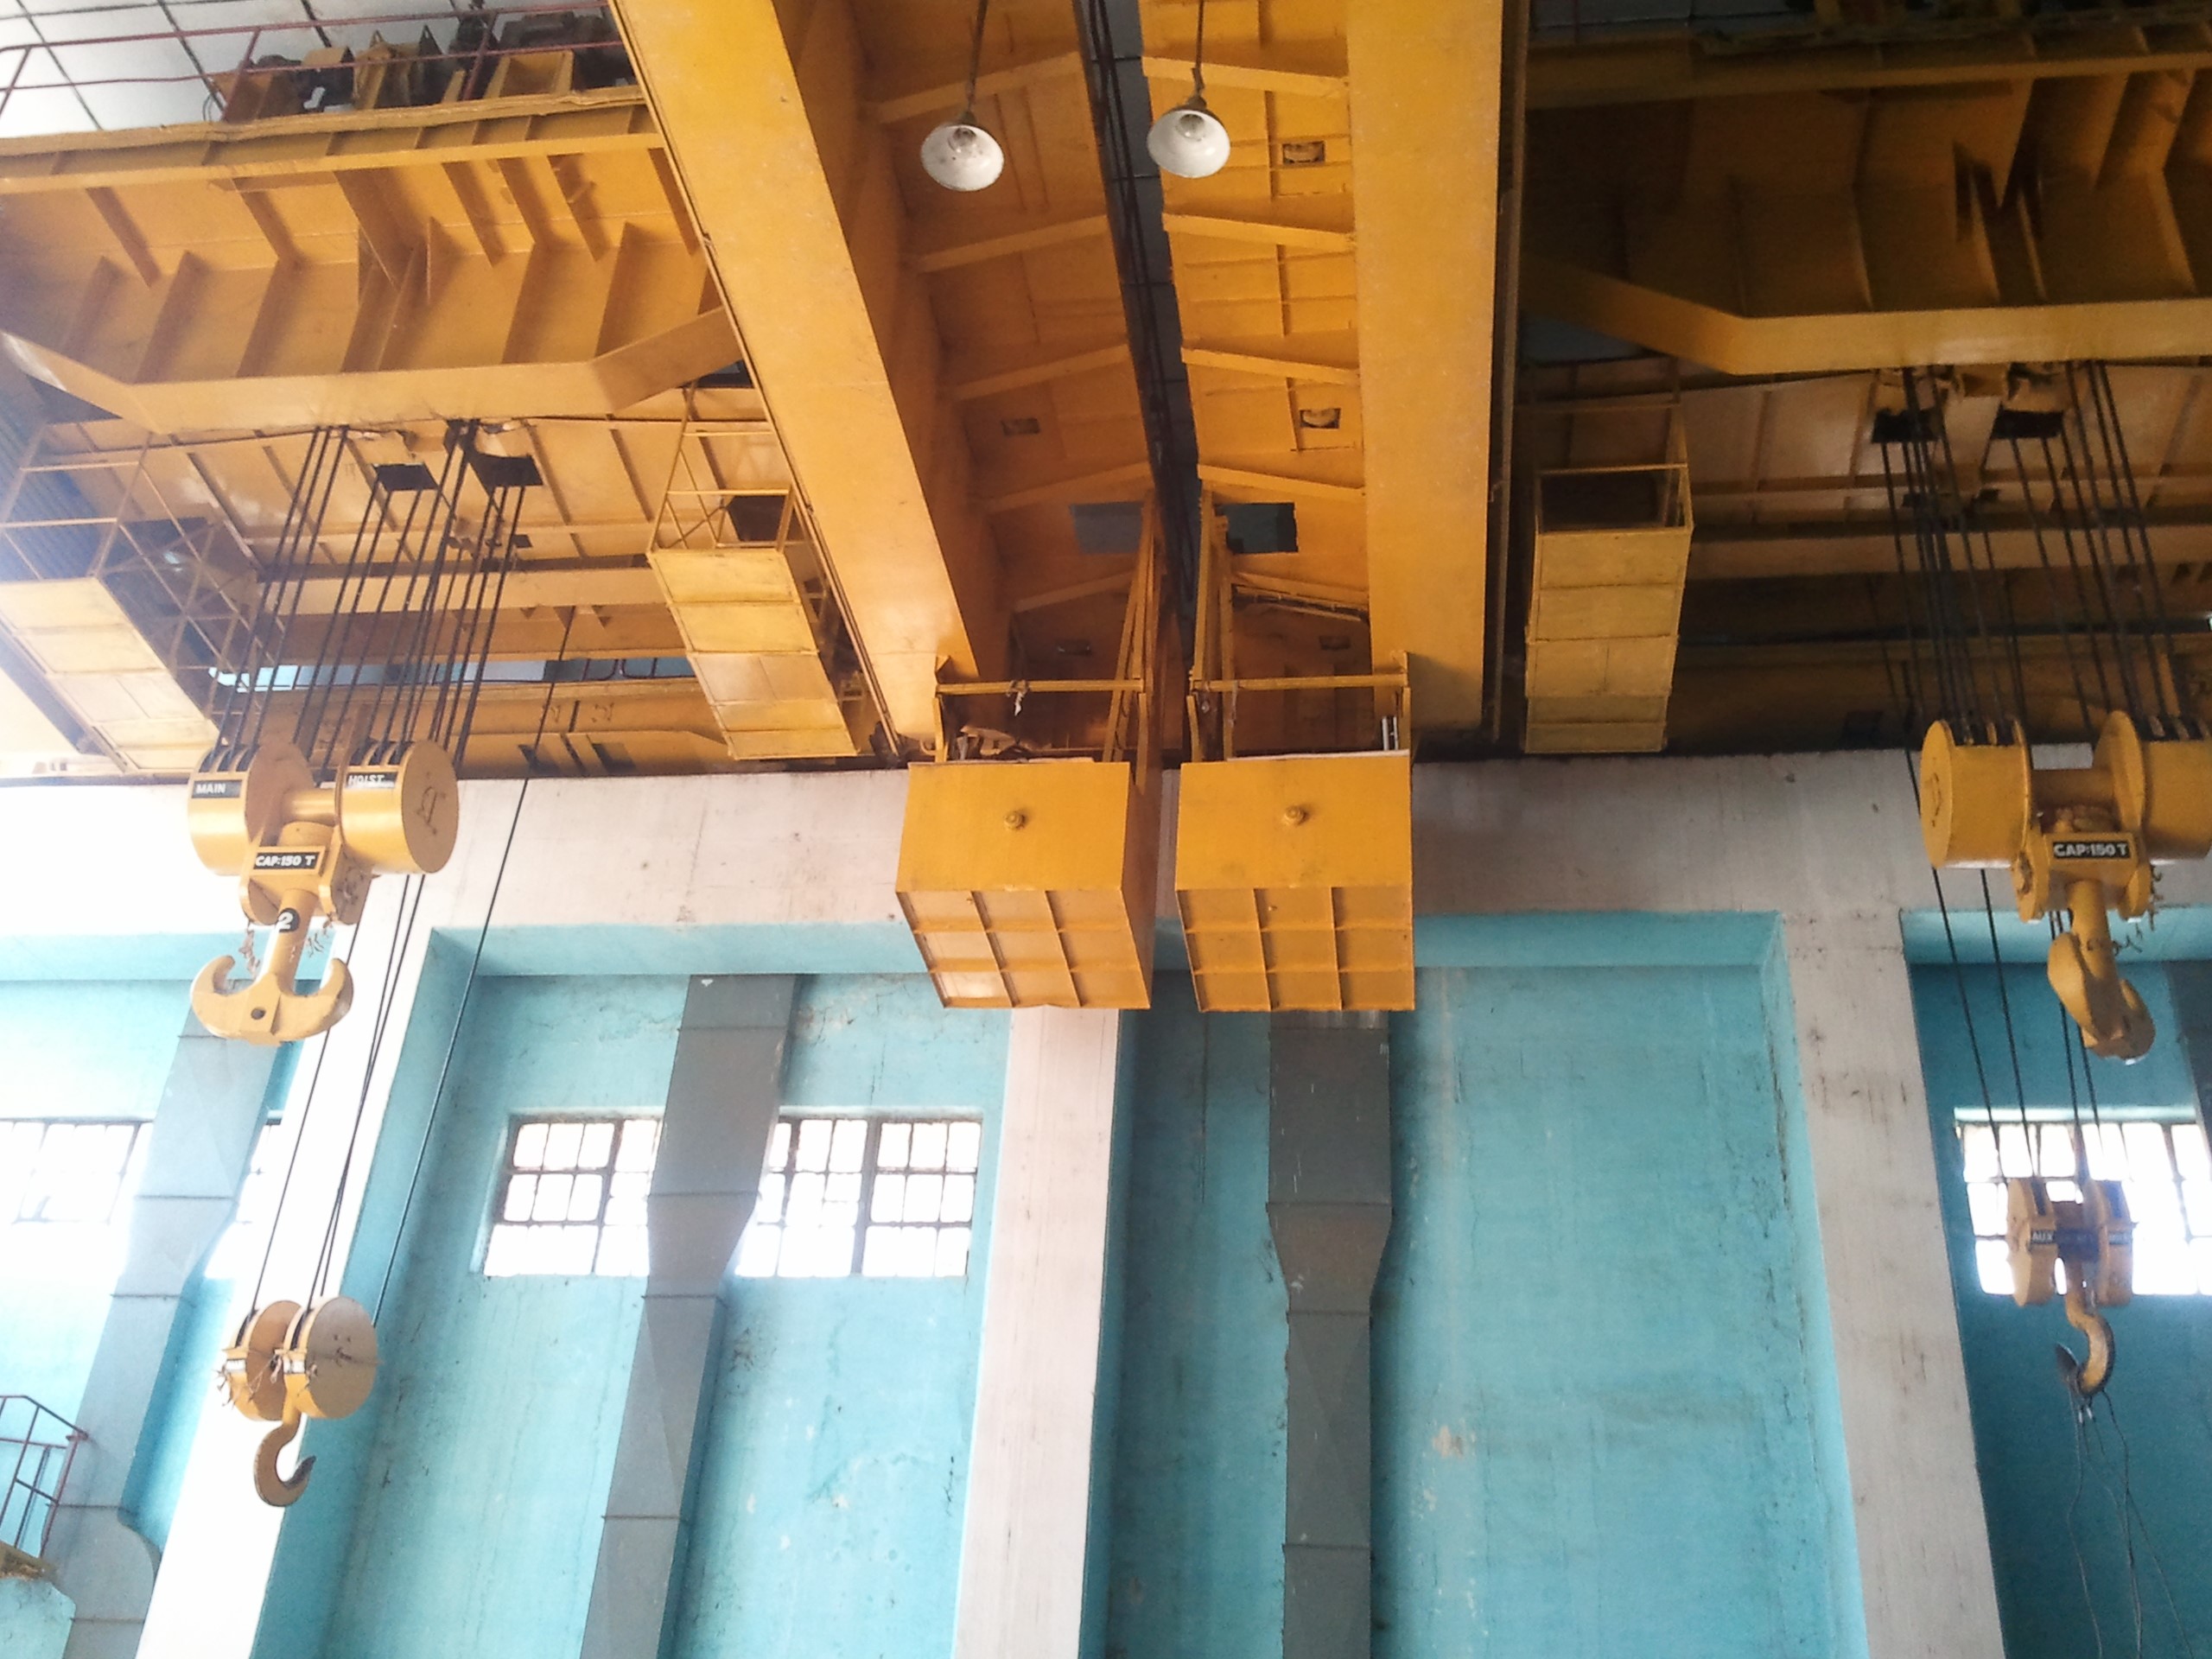 Complete Overhauling and repairing of 150/30 Tons EOT Cranes 02 Nos., including supply/ replacement required spares at Hydro Power Station, Uka